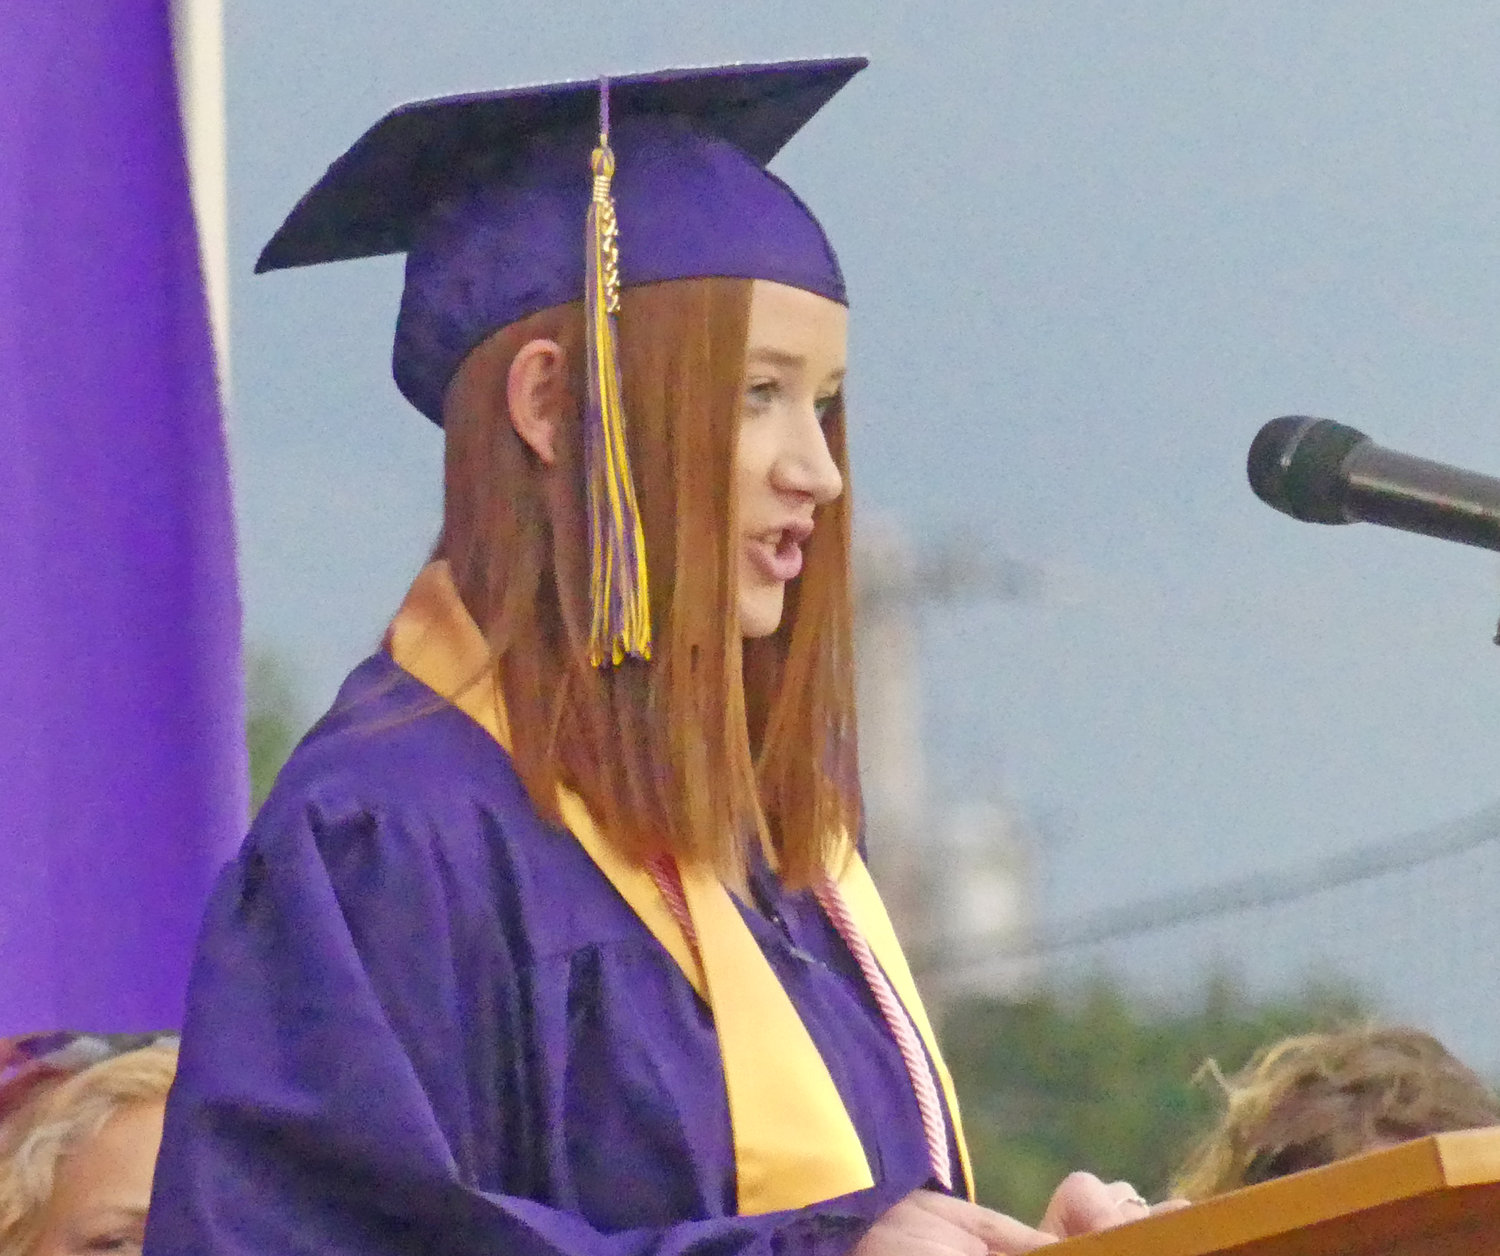 Senior Kylie Vienneau delivered the valedictory address Friday in Holland Patent as members of the district’s Class of 2022 received their diplomas.